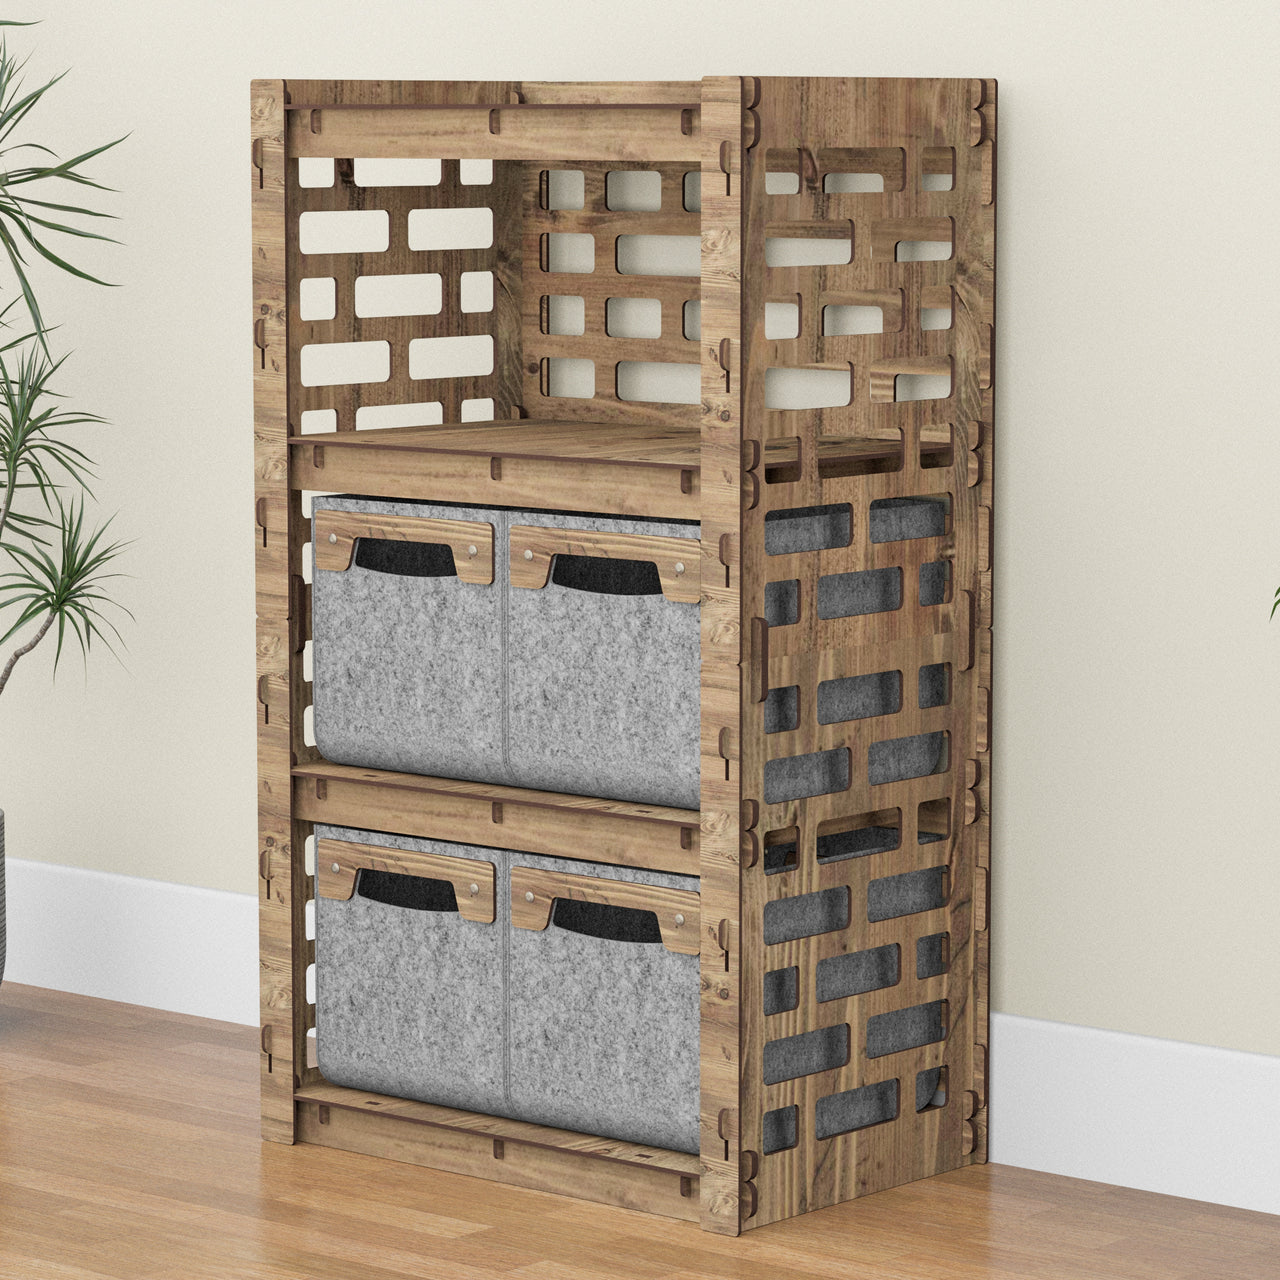 Brickwall Chest Of 4 Drawers Storage Cabinet [4 SMALL GRAY BINS]